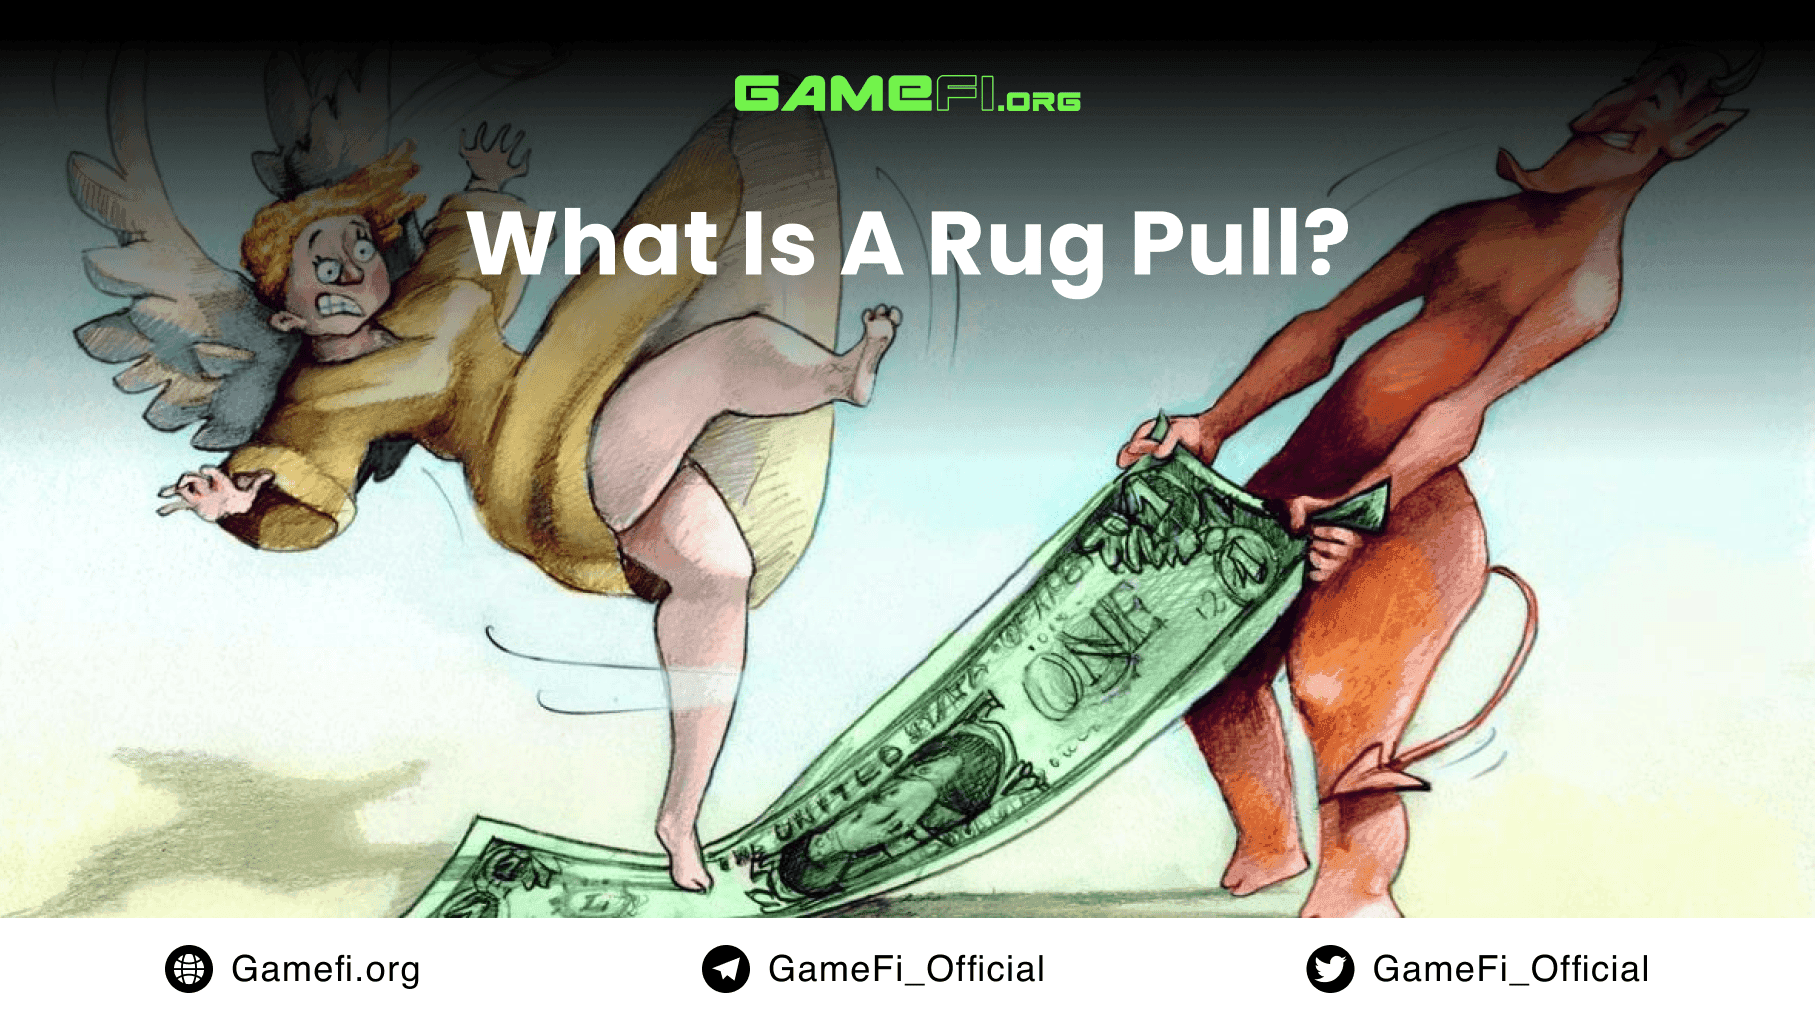 What Is A Rug Pull?